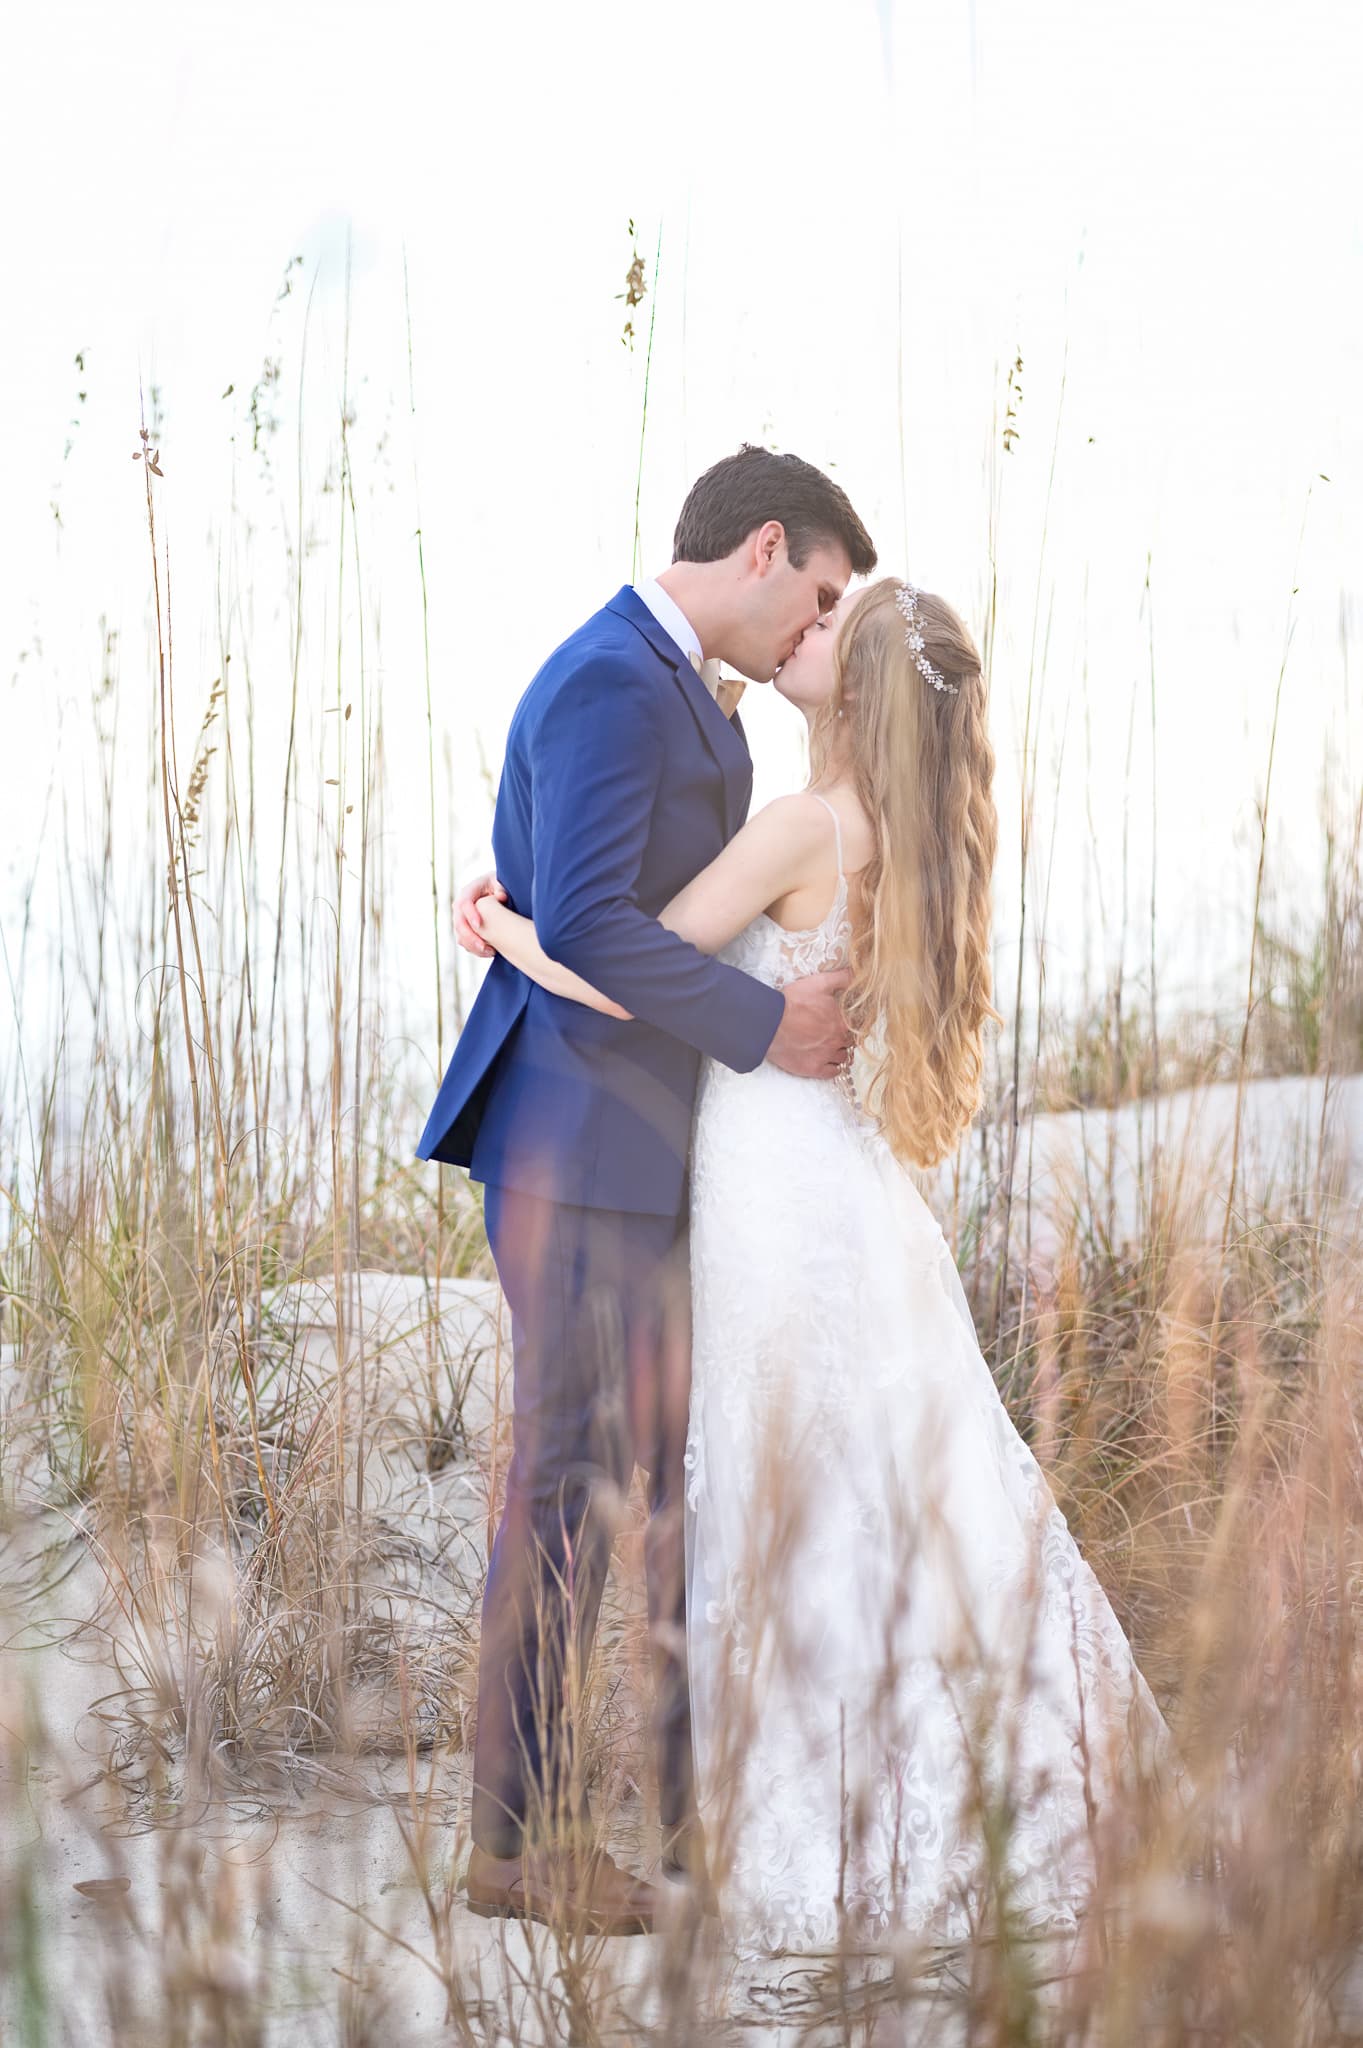 Kiss in the sea oats -